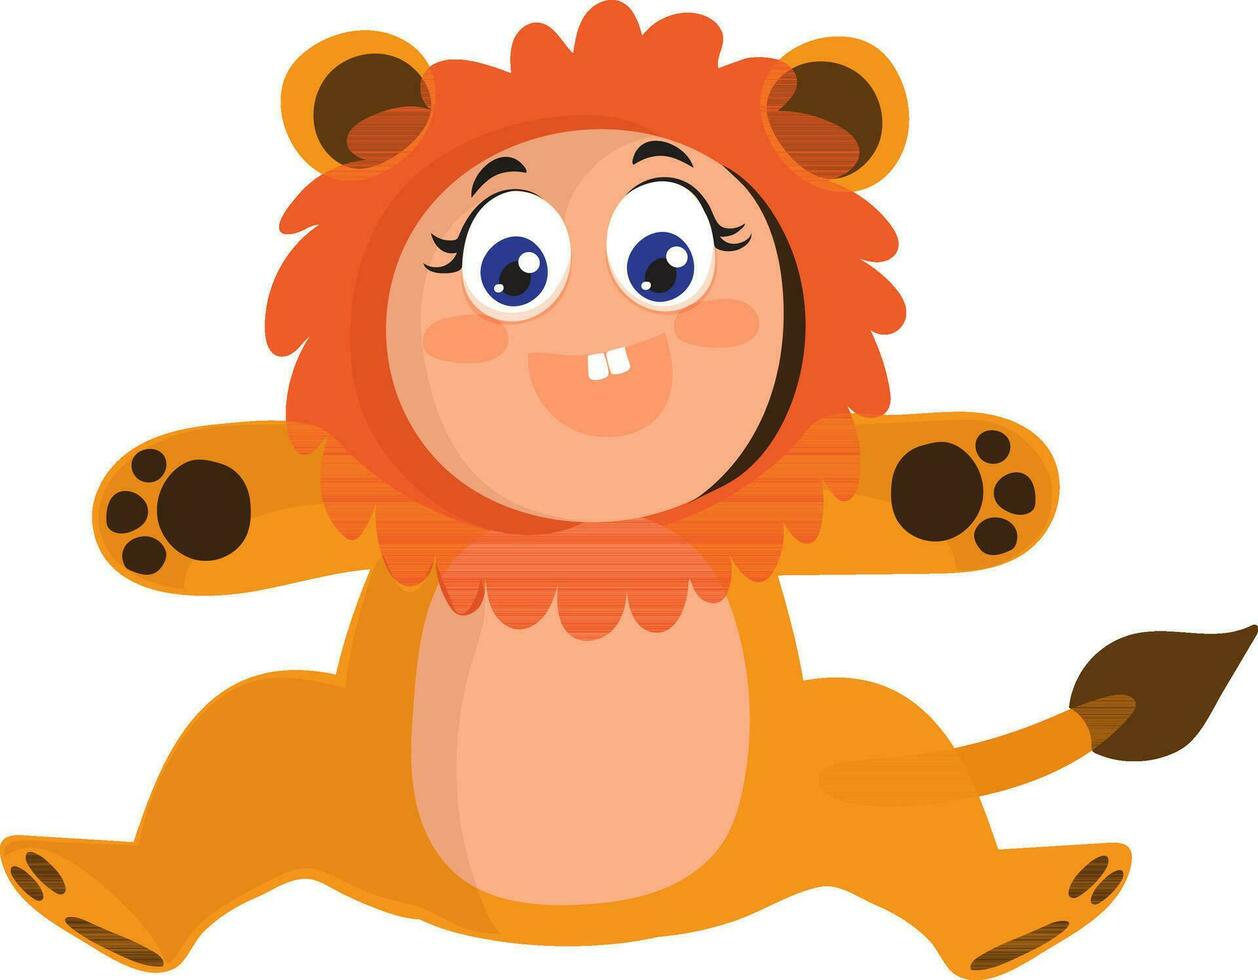 Cute little baby in lion's costume. vector